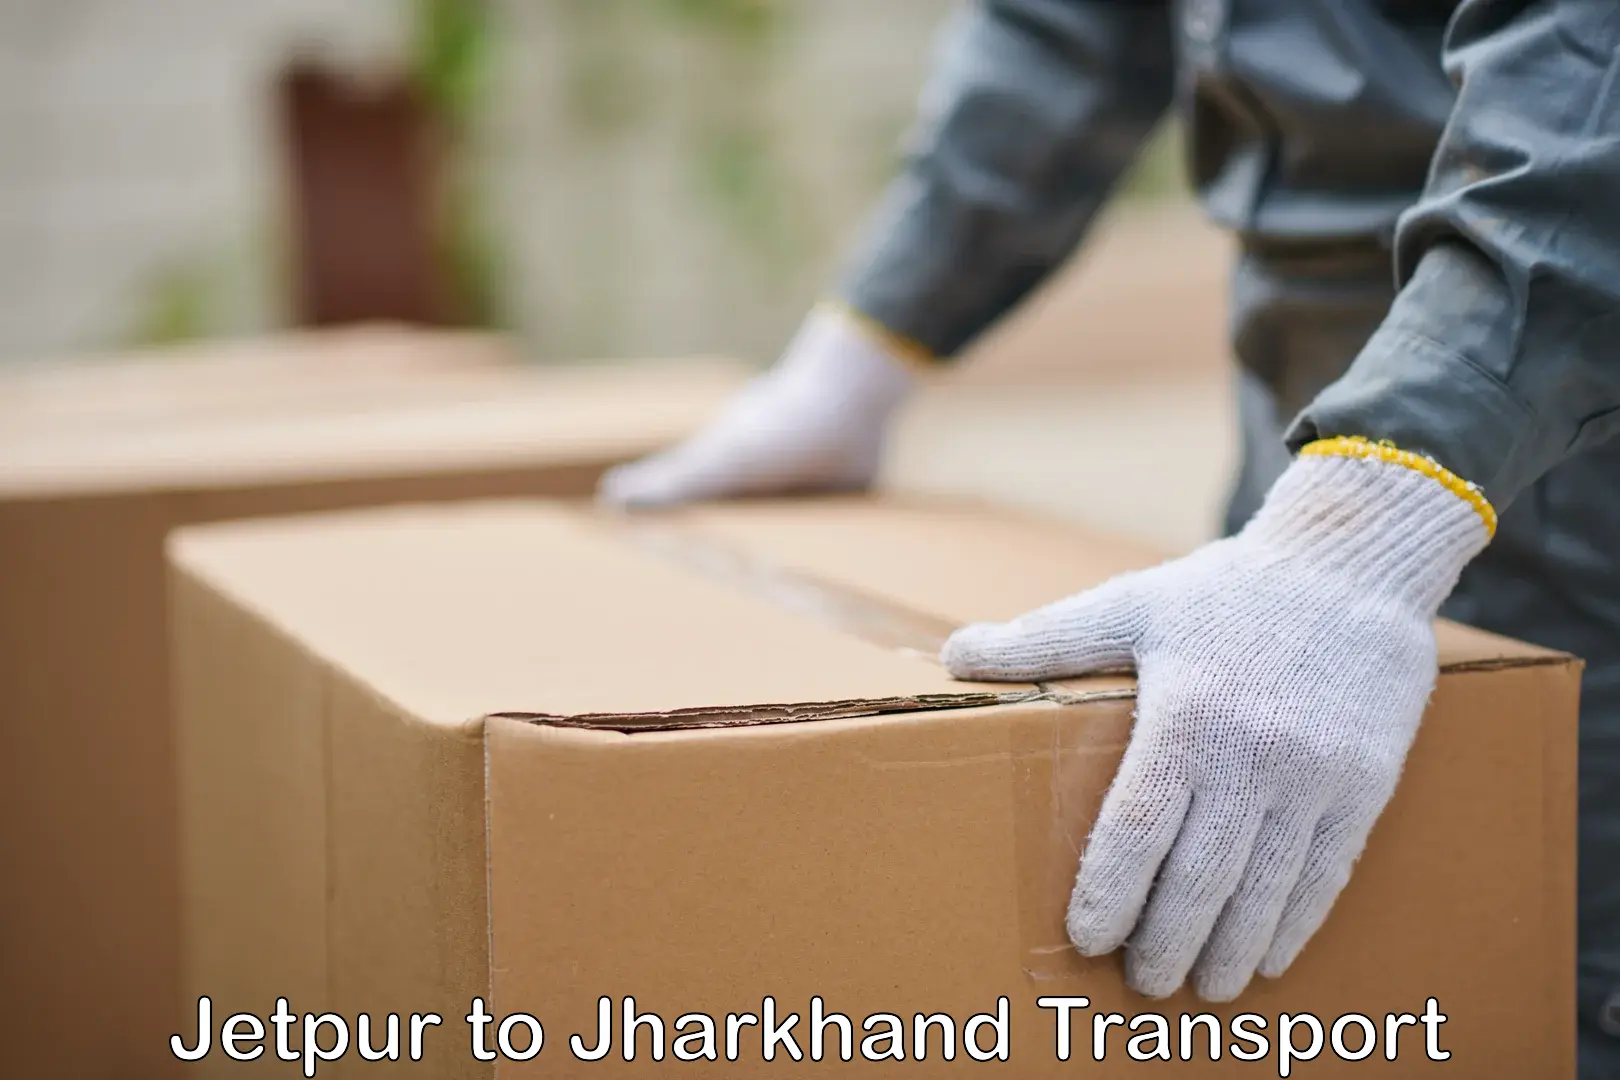 Transport shared services Jetpur to Jharkhand